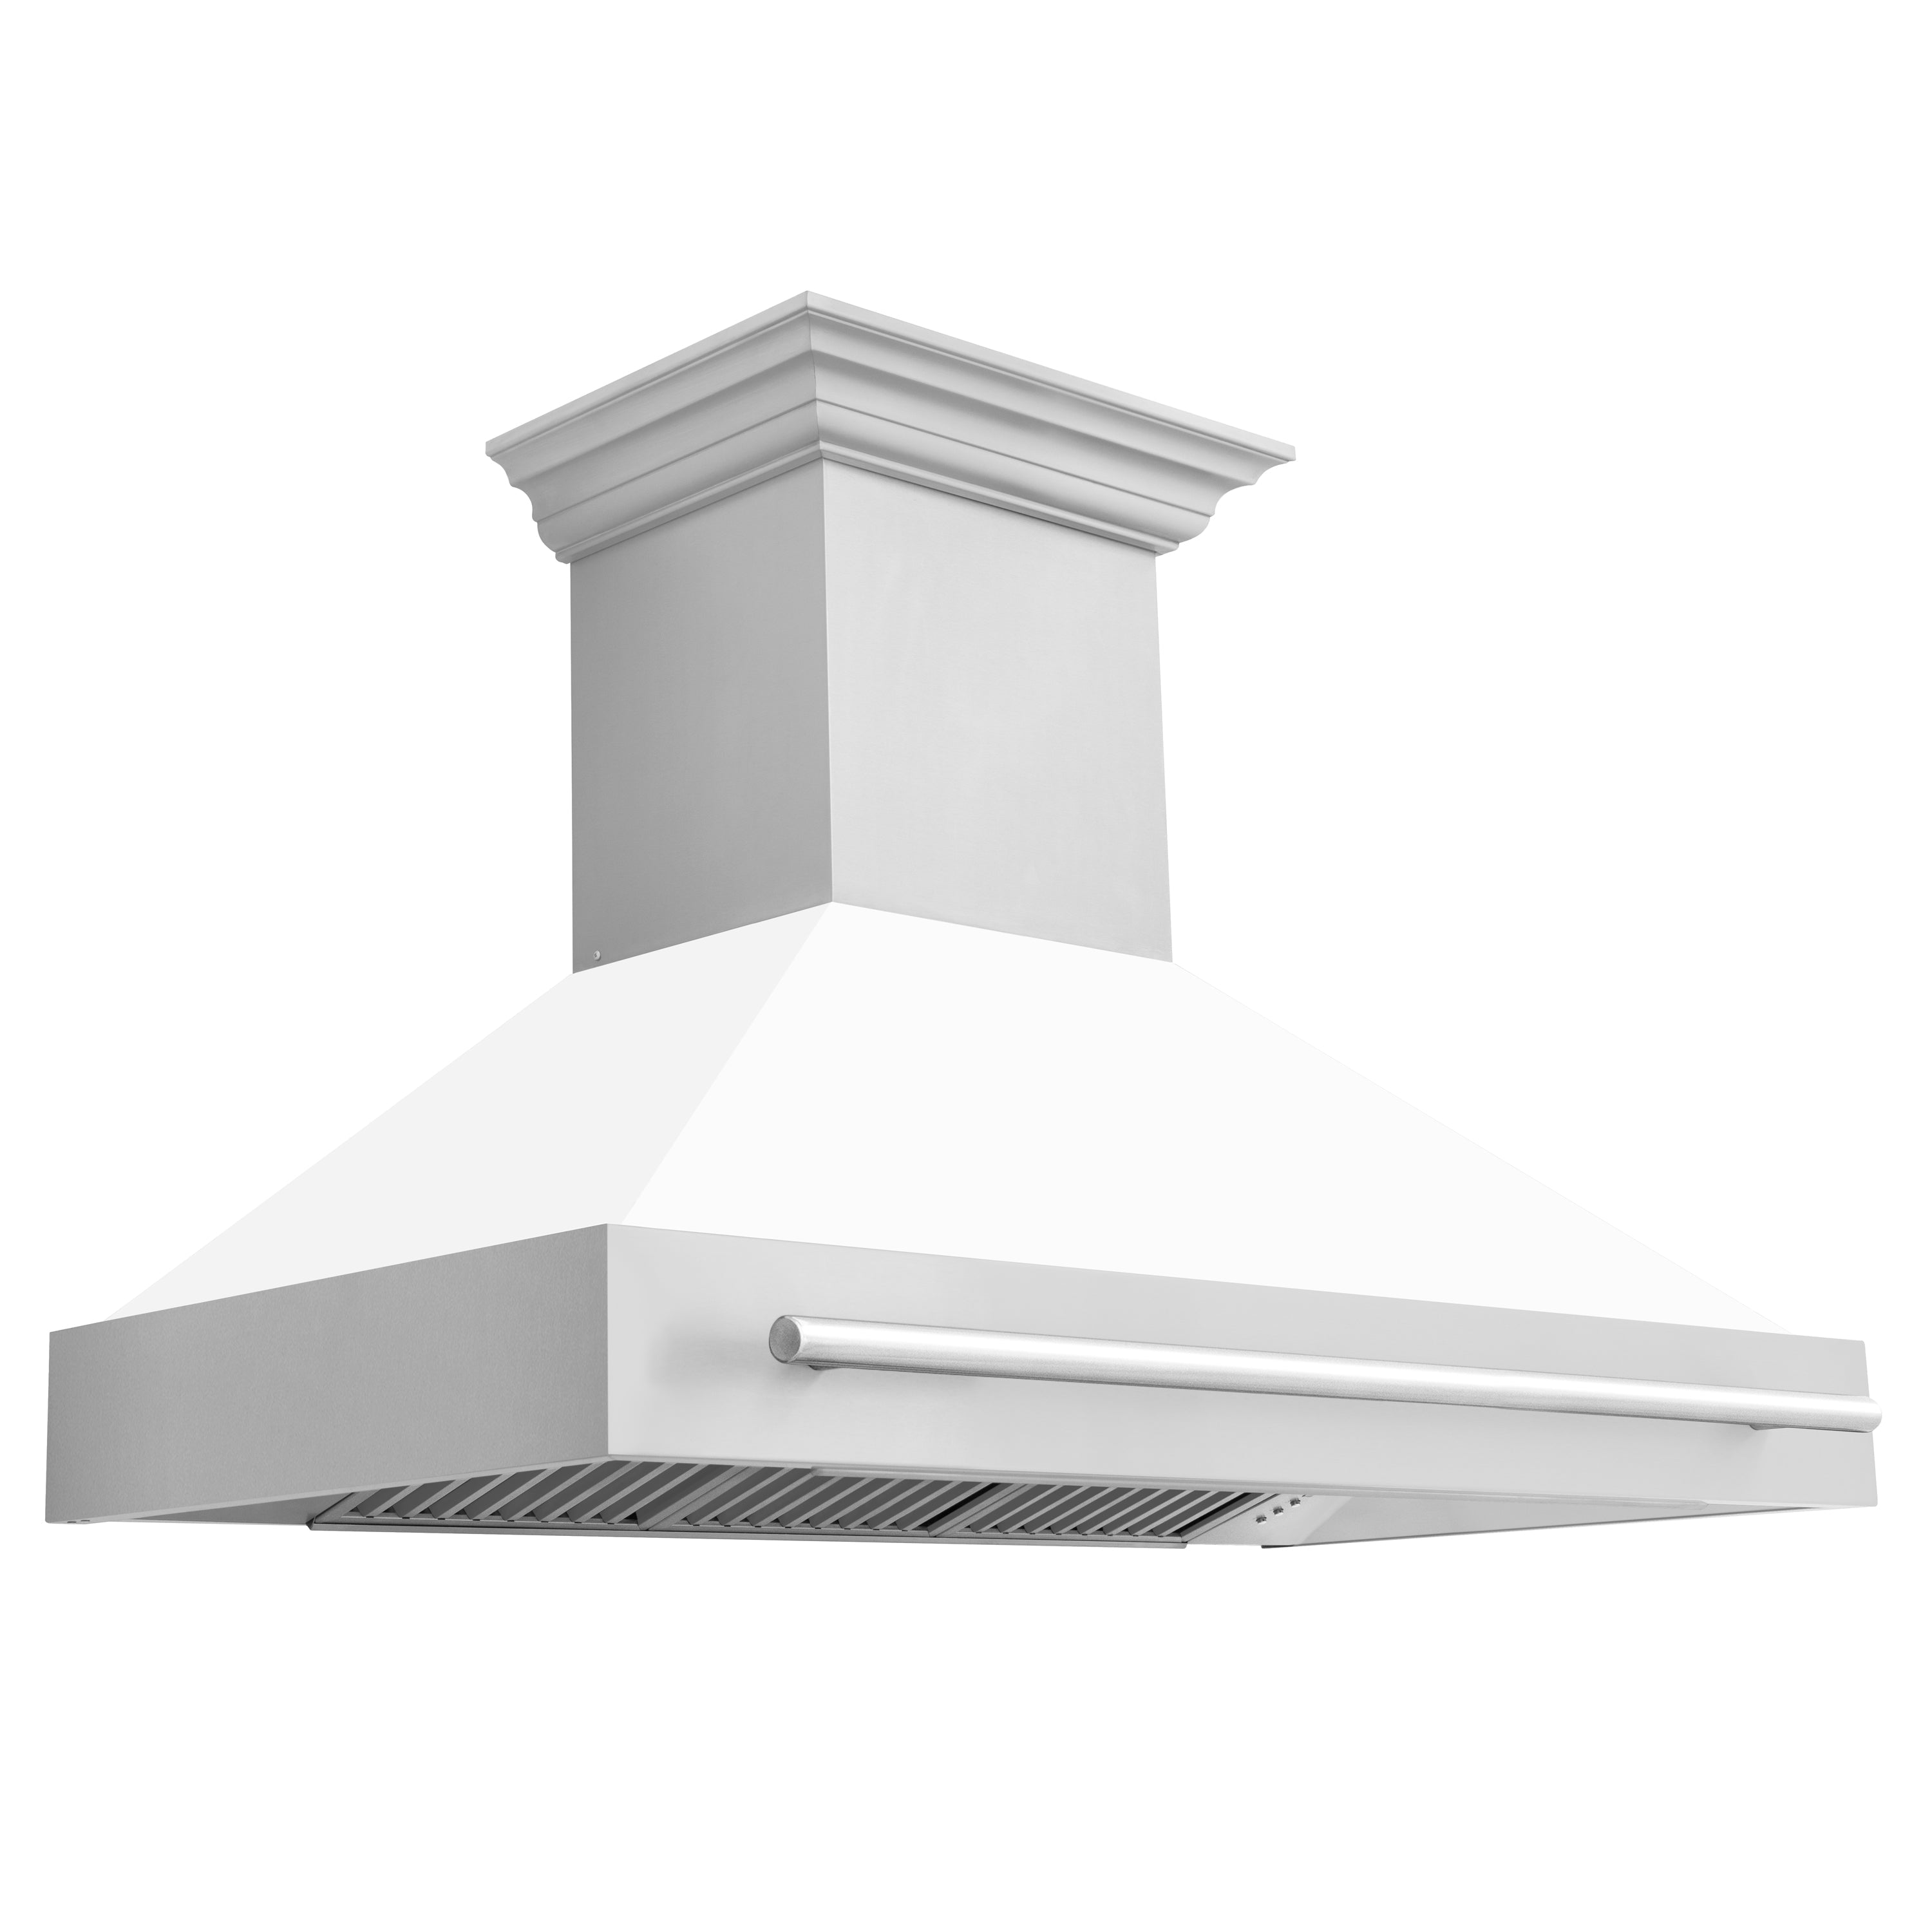 ZLINE 48 in. Stainless Steel Range Hood with Stainless Steel Handle (8654STX-48) White Matte